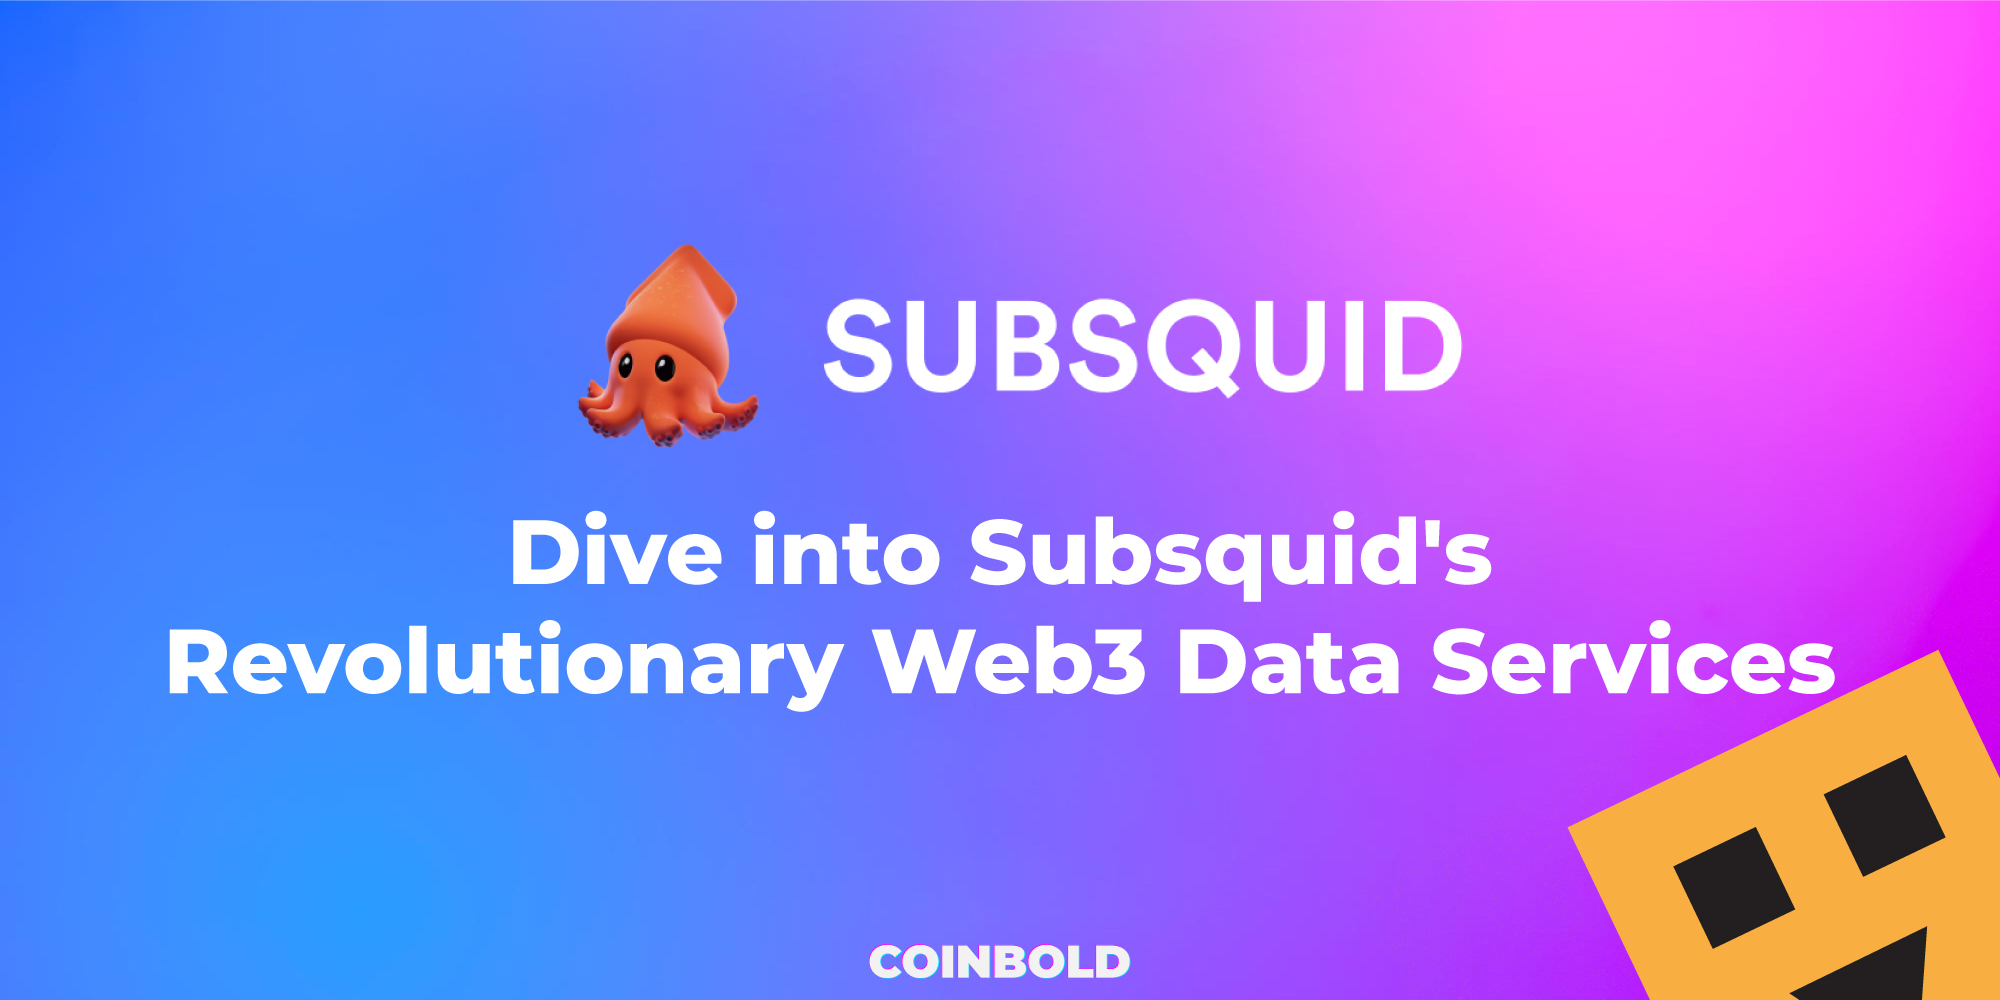 Dive into Subsquid's Revolutionary Web3 Data Services